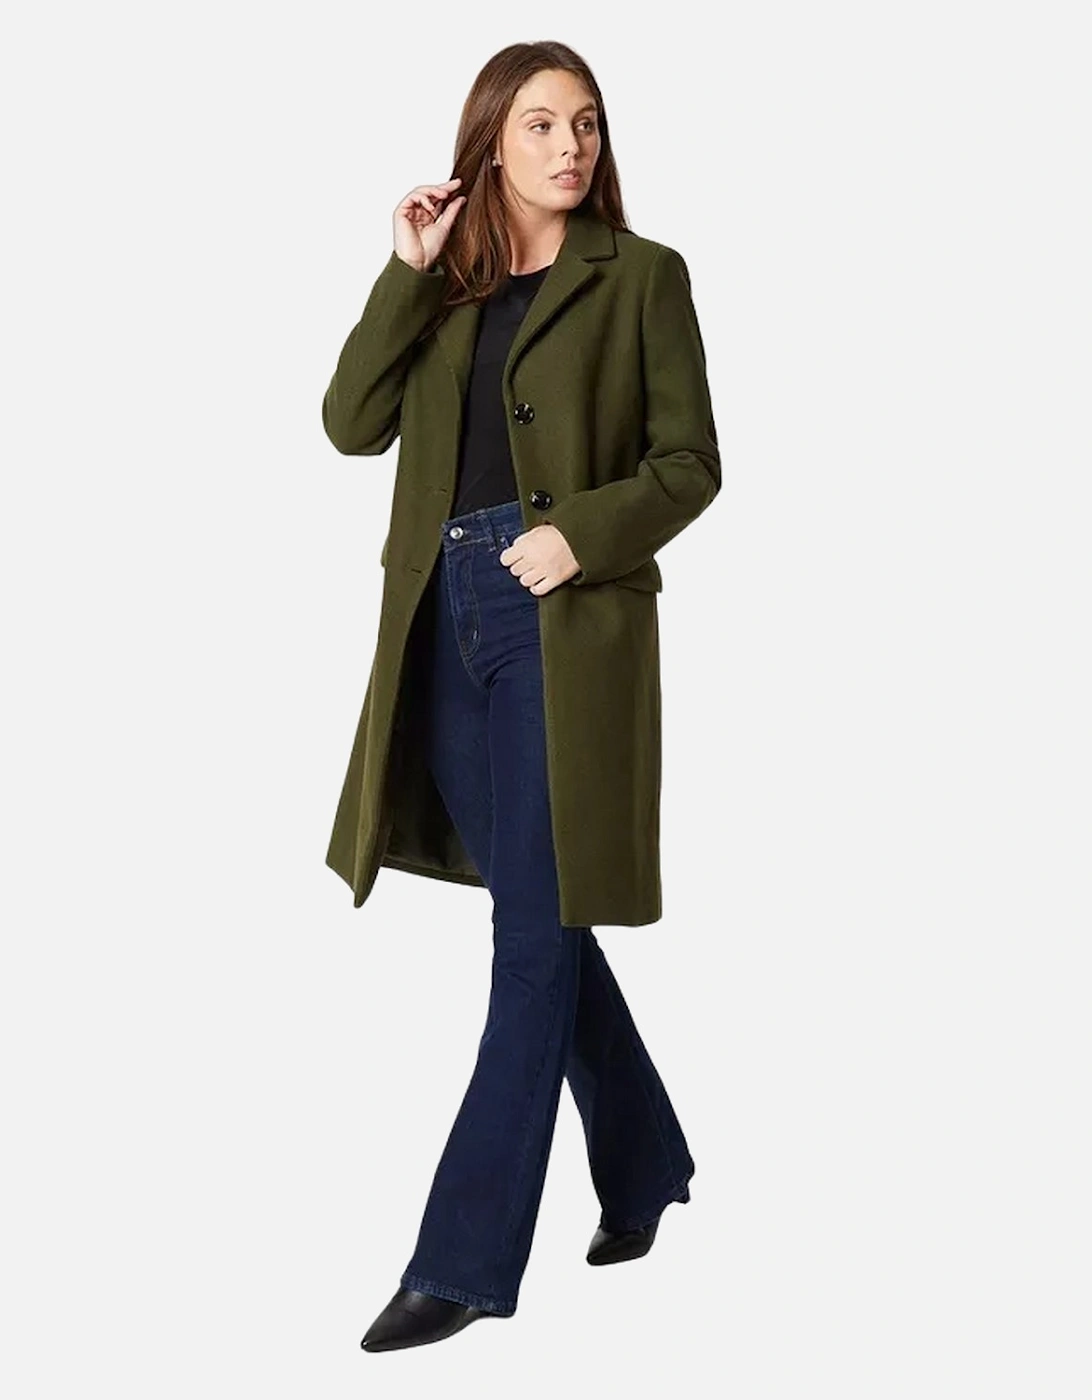 Womens/Ladies Long Length Fitted And Flared Coat